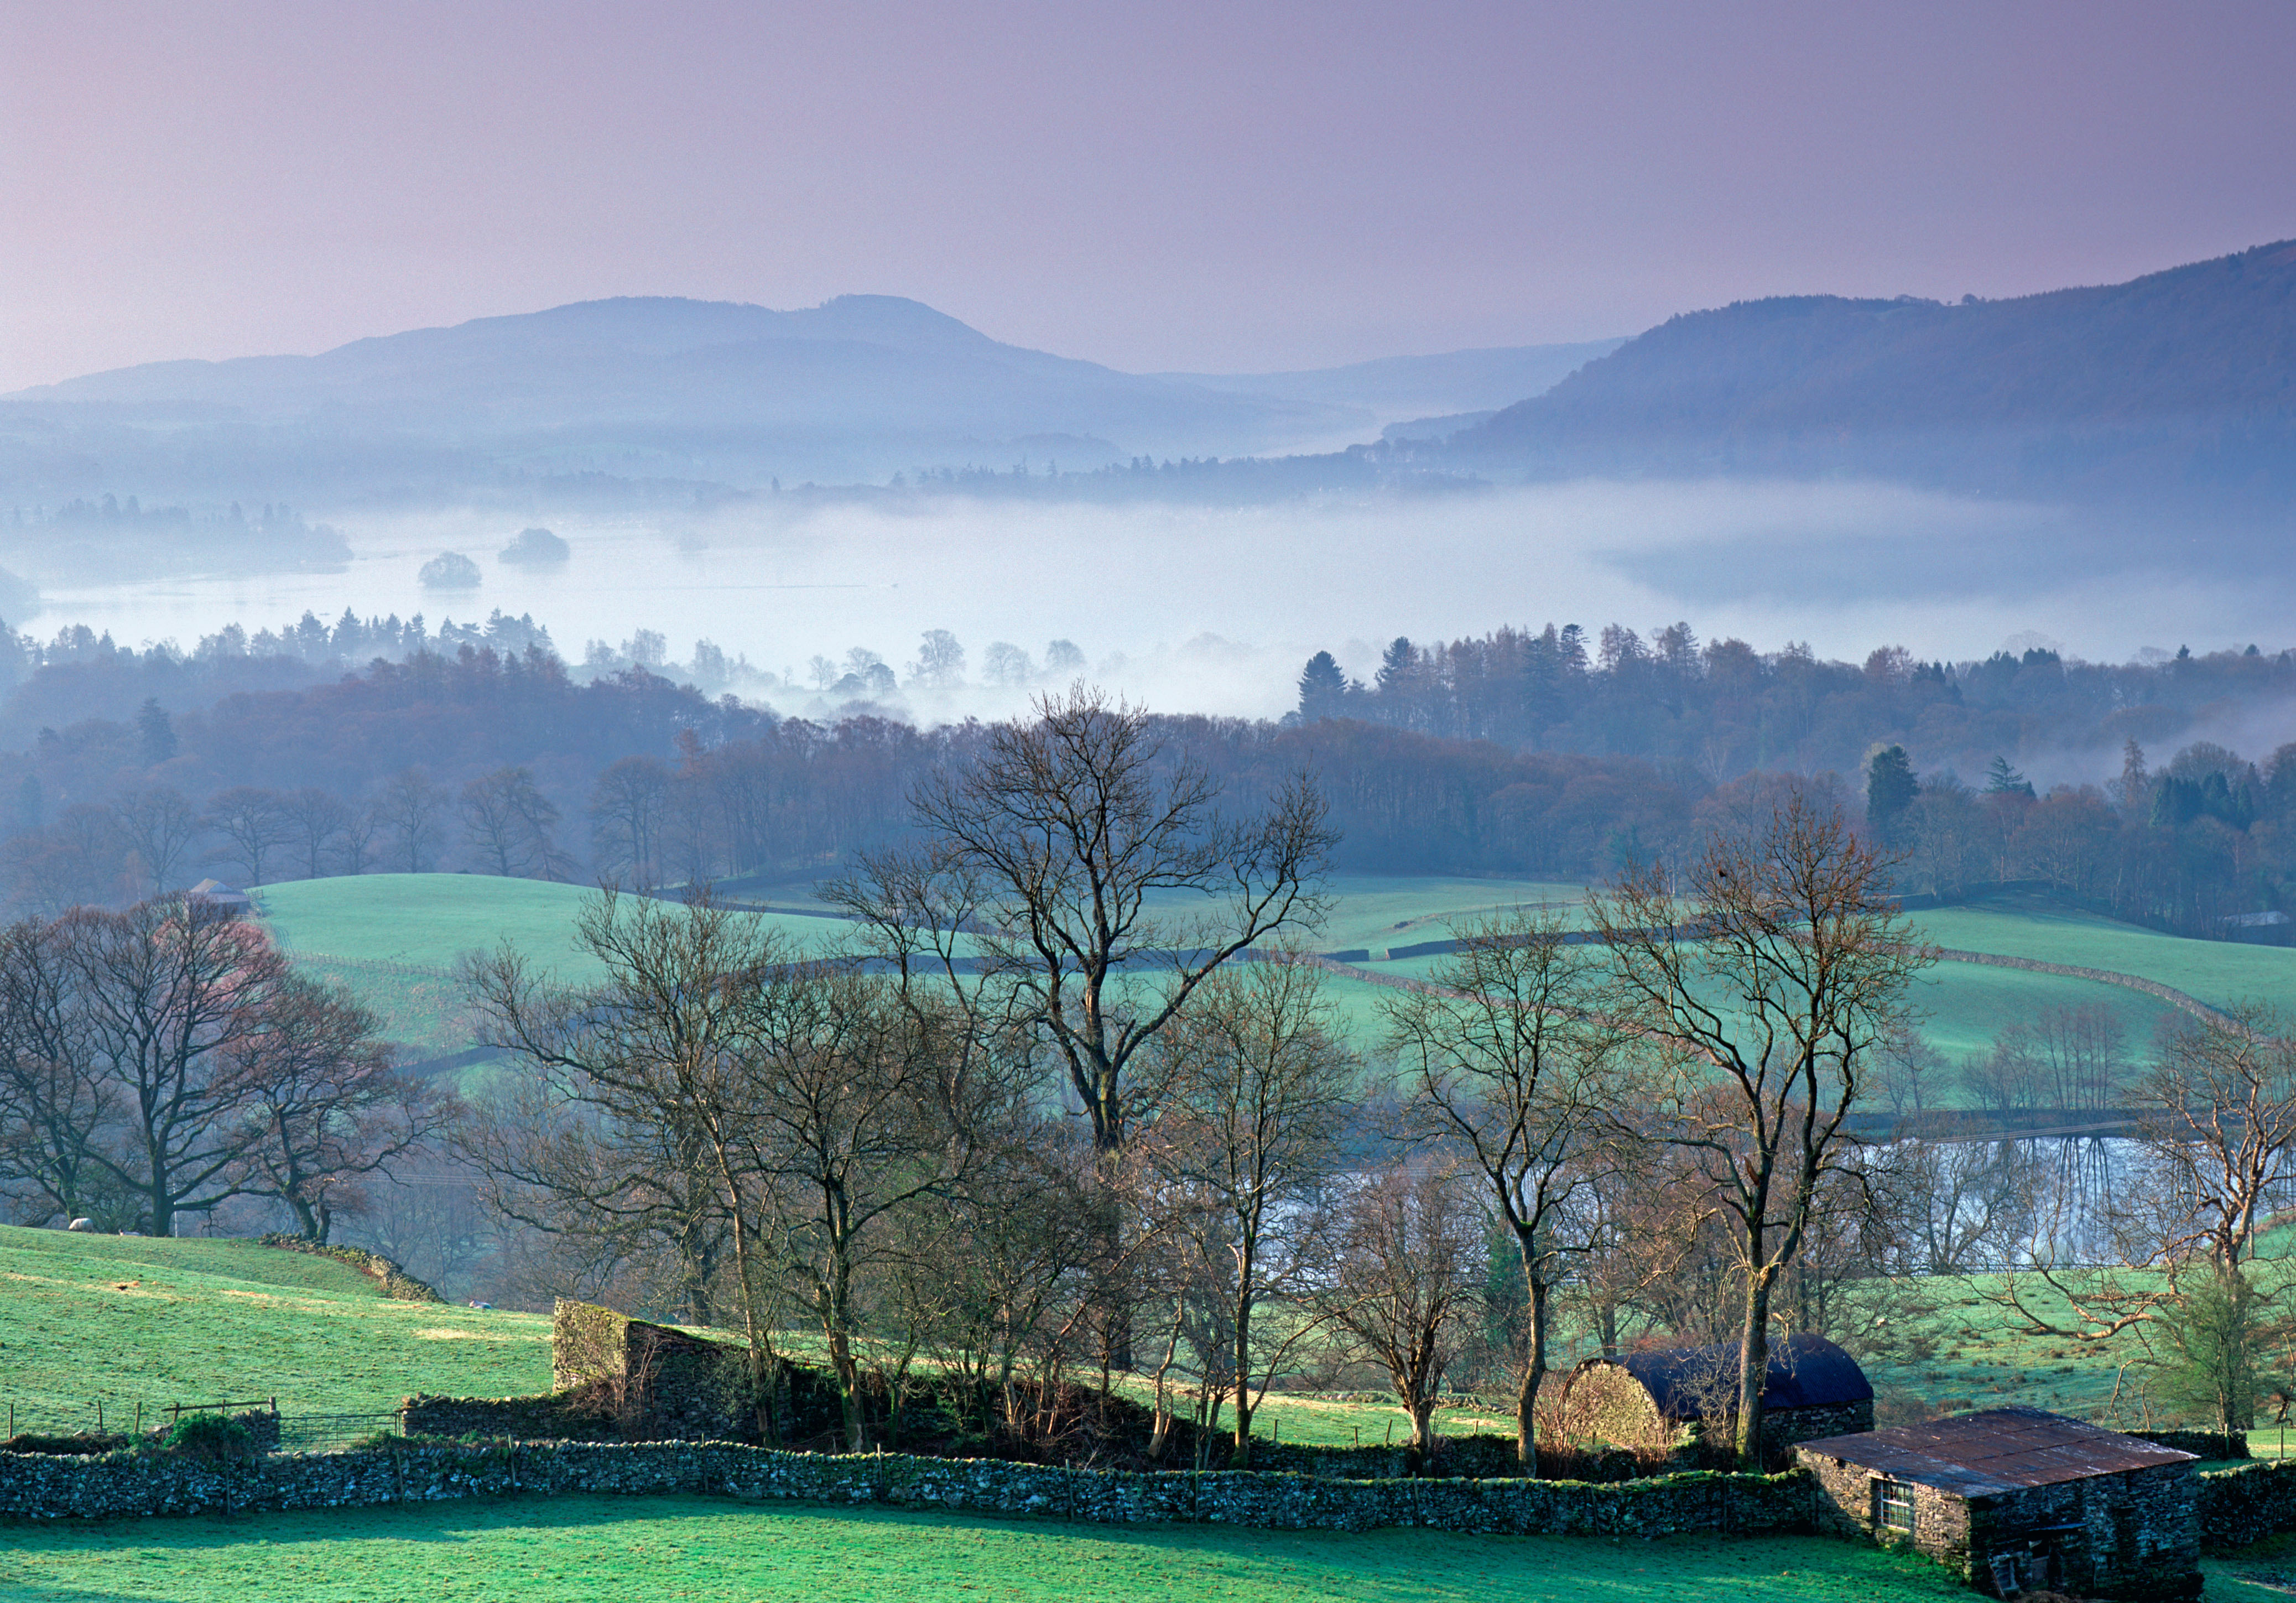 Looking South over Lake Windermere from Troutbeck. The lake is covered in mist caused by a temperature inversion common in Spring and Autumn.